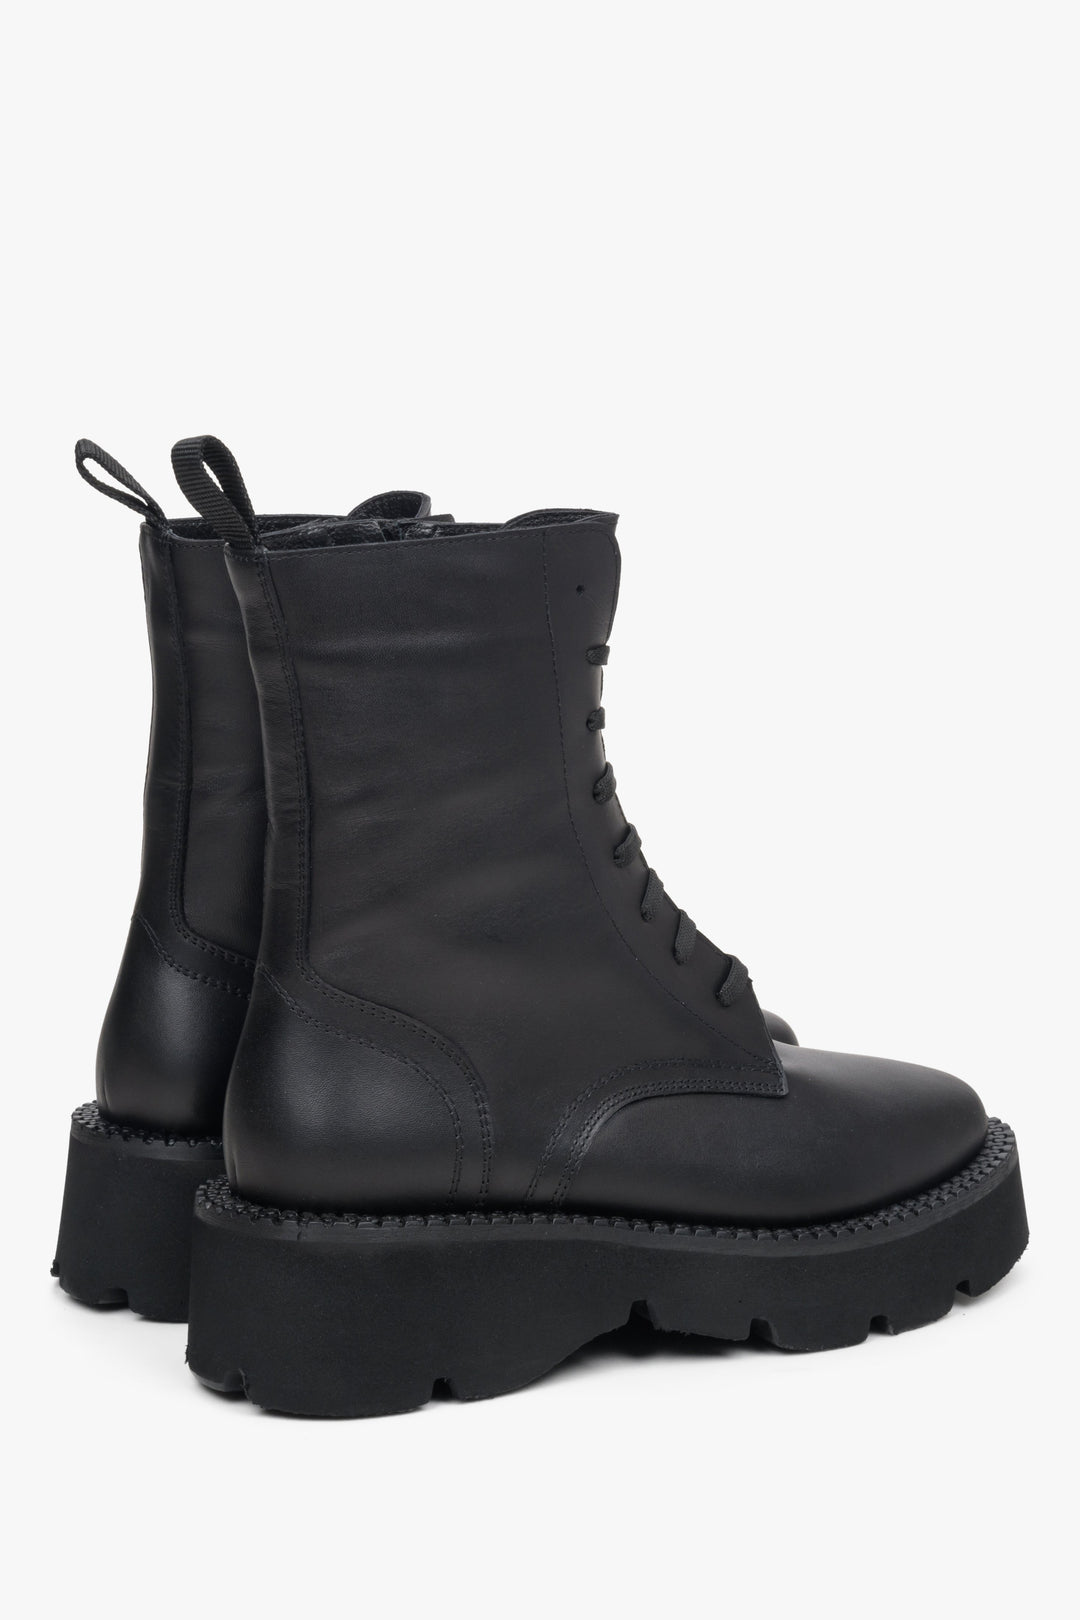 Women's black leather boots by Estro - close-up on the sole and side line of the boot.